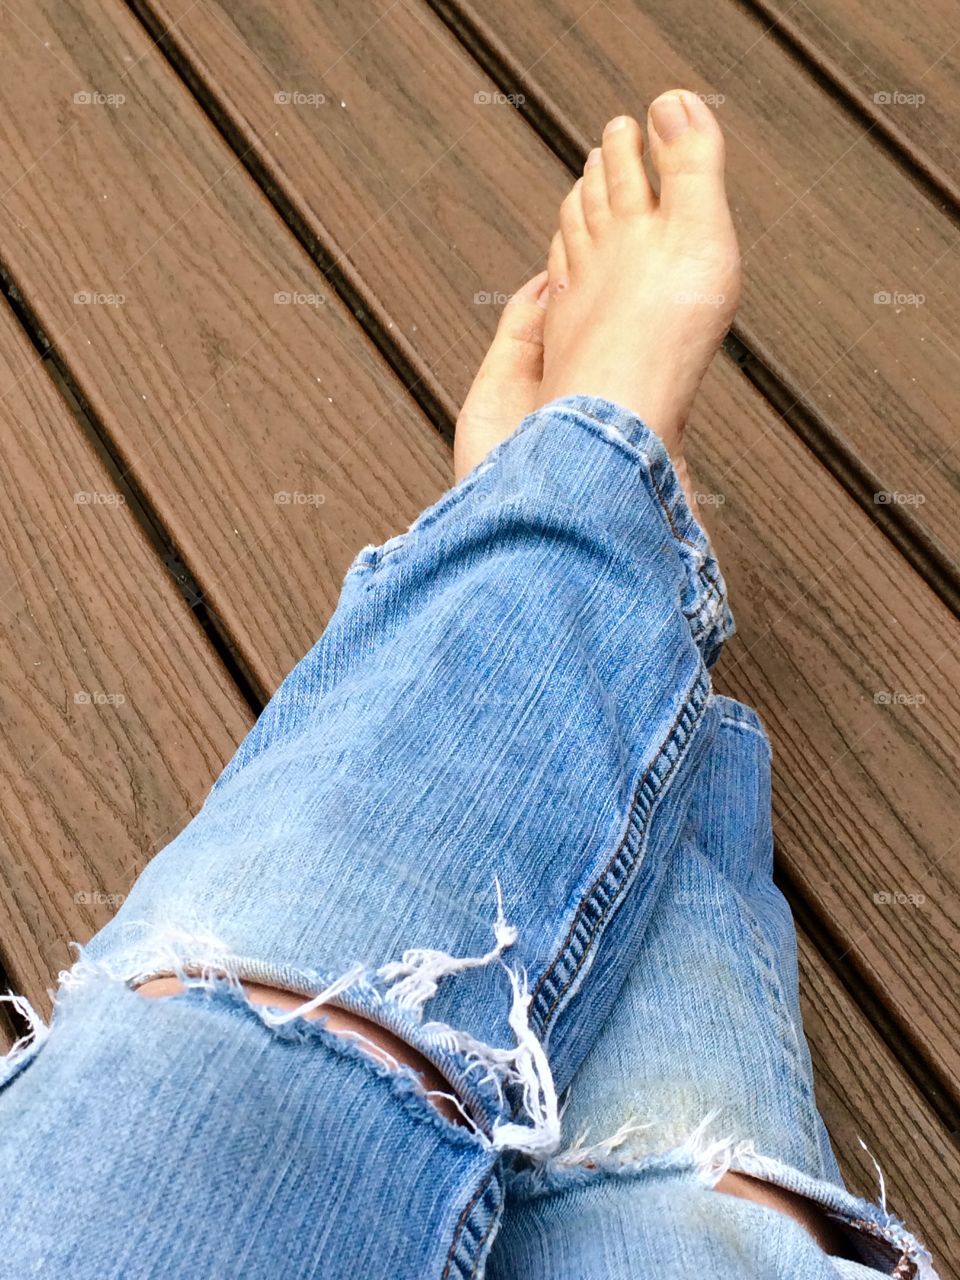 Barefoot and jeans